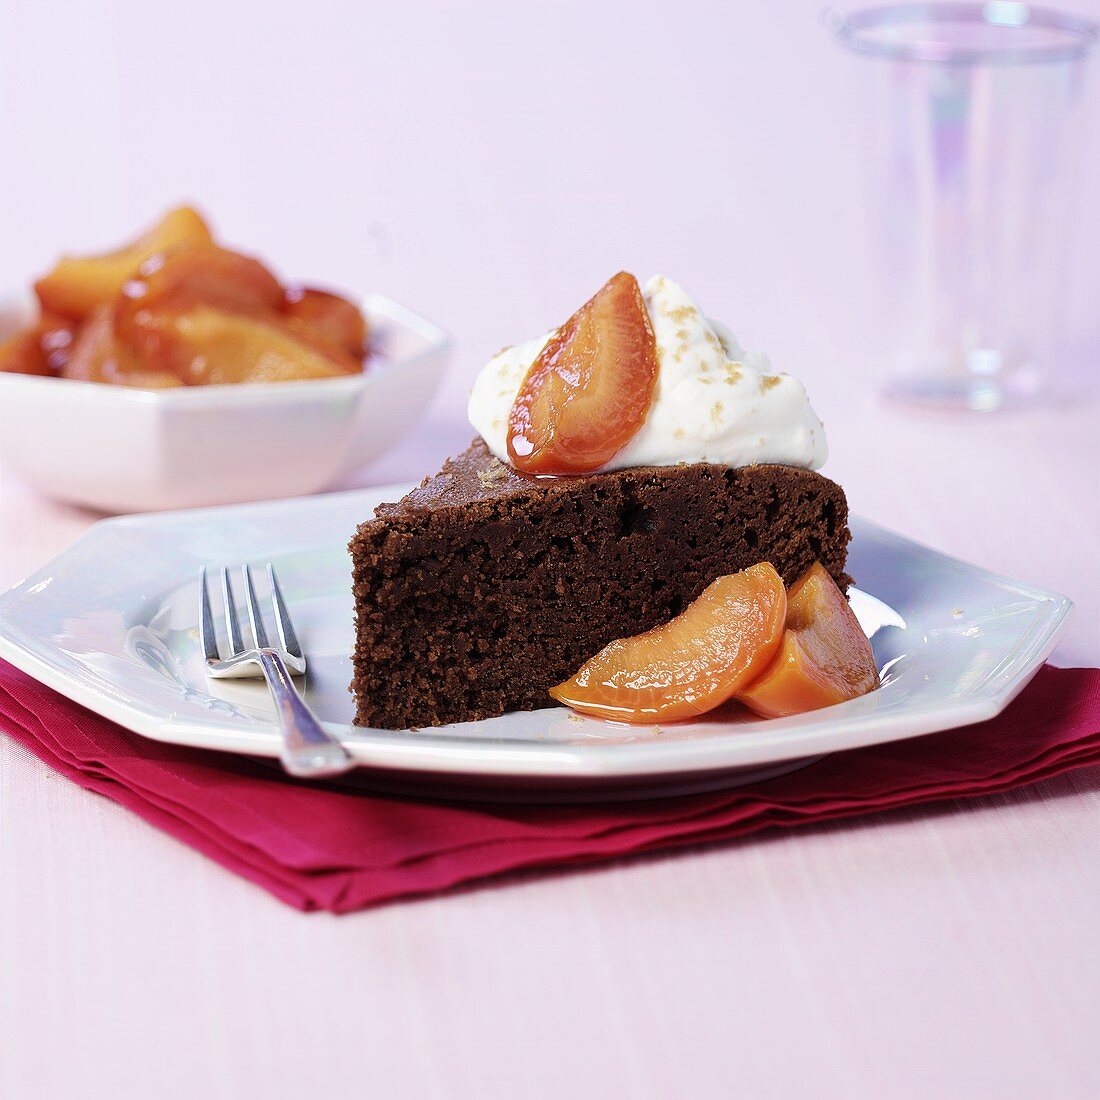 A piece of chocolate cake with peach compote